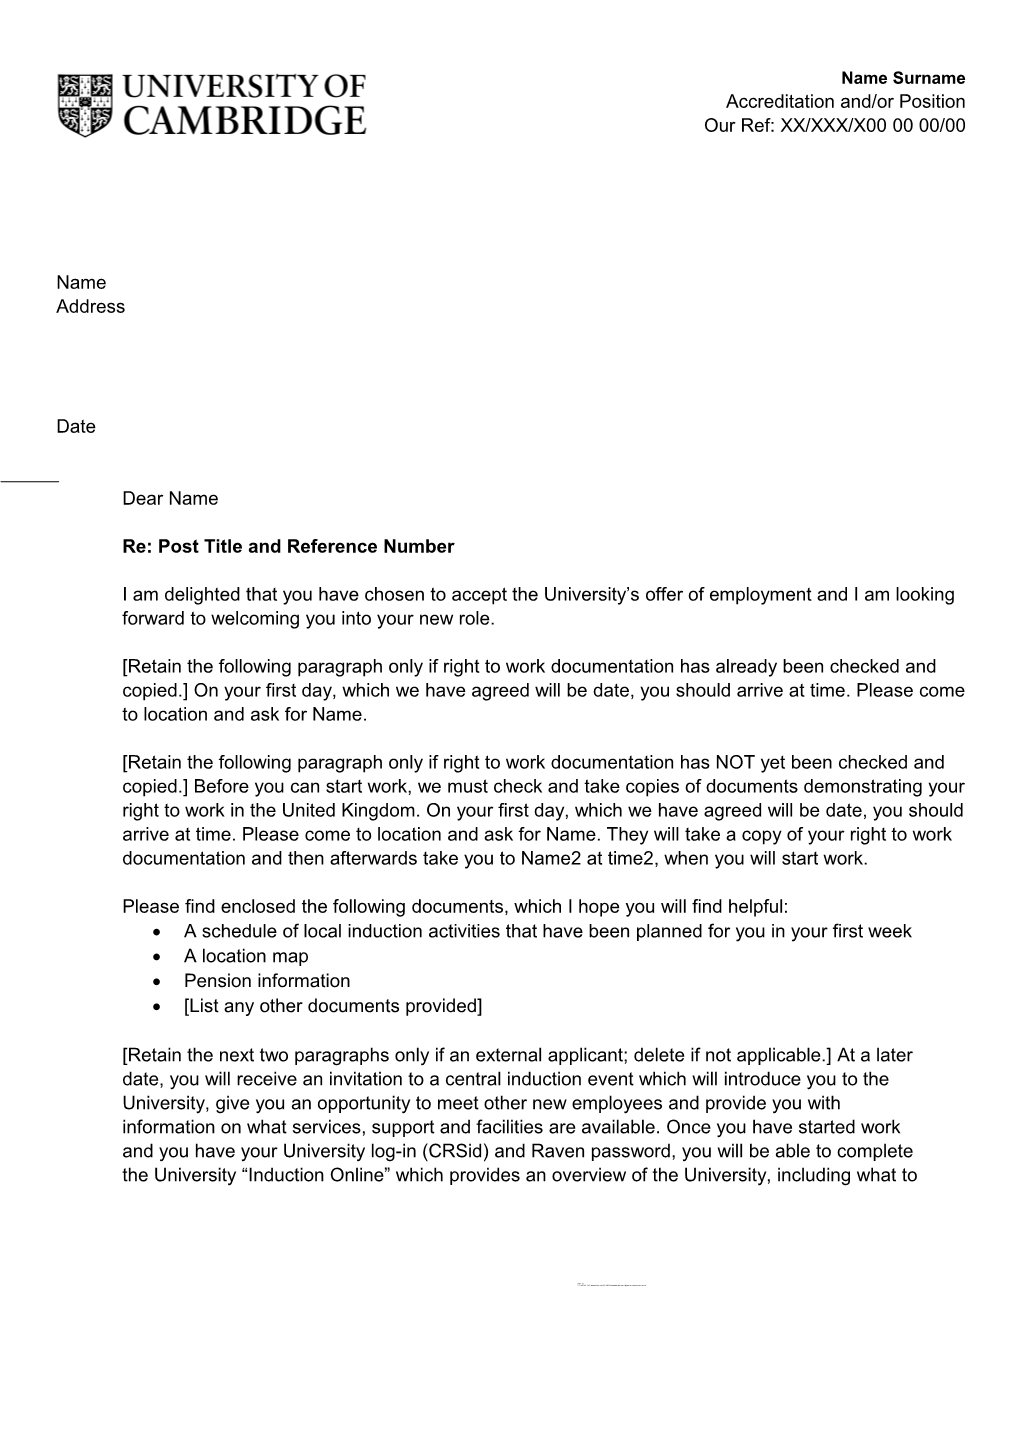 HR23 Welcome Letter Template